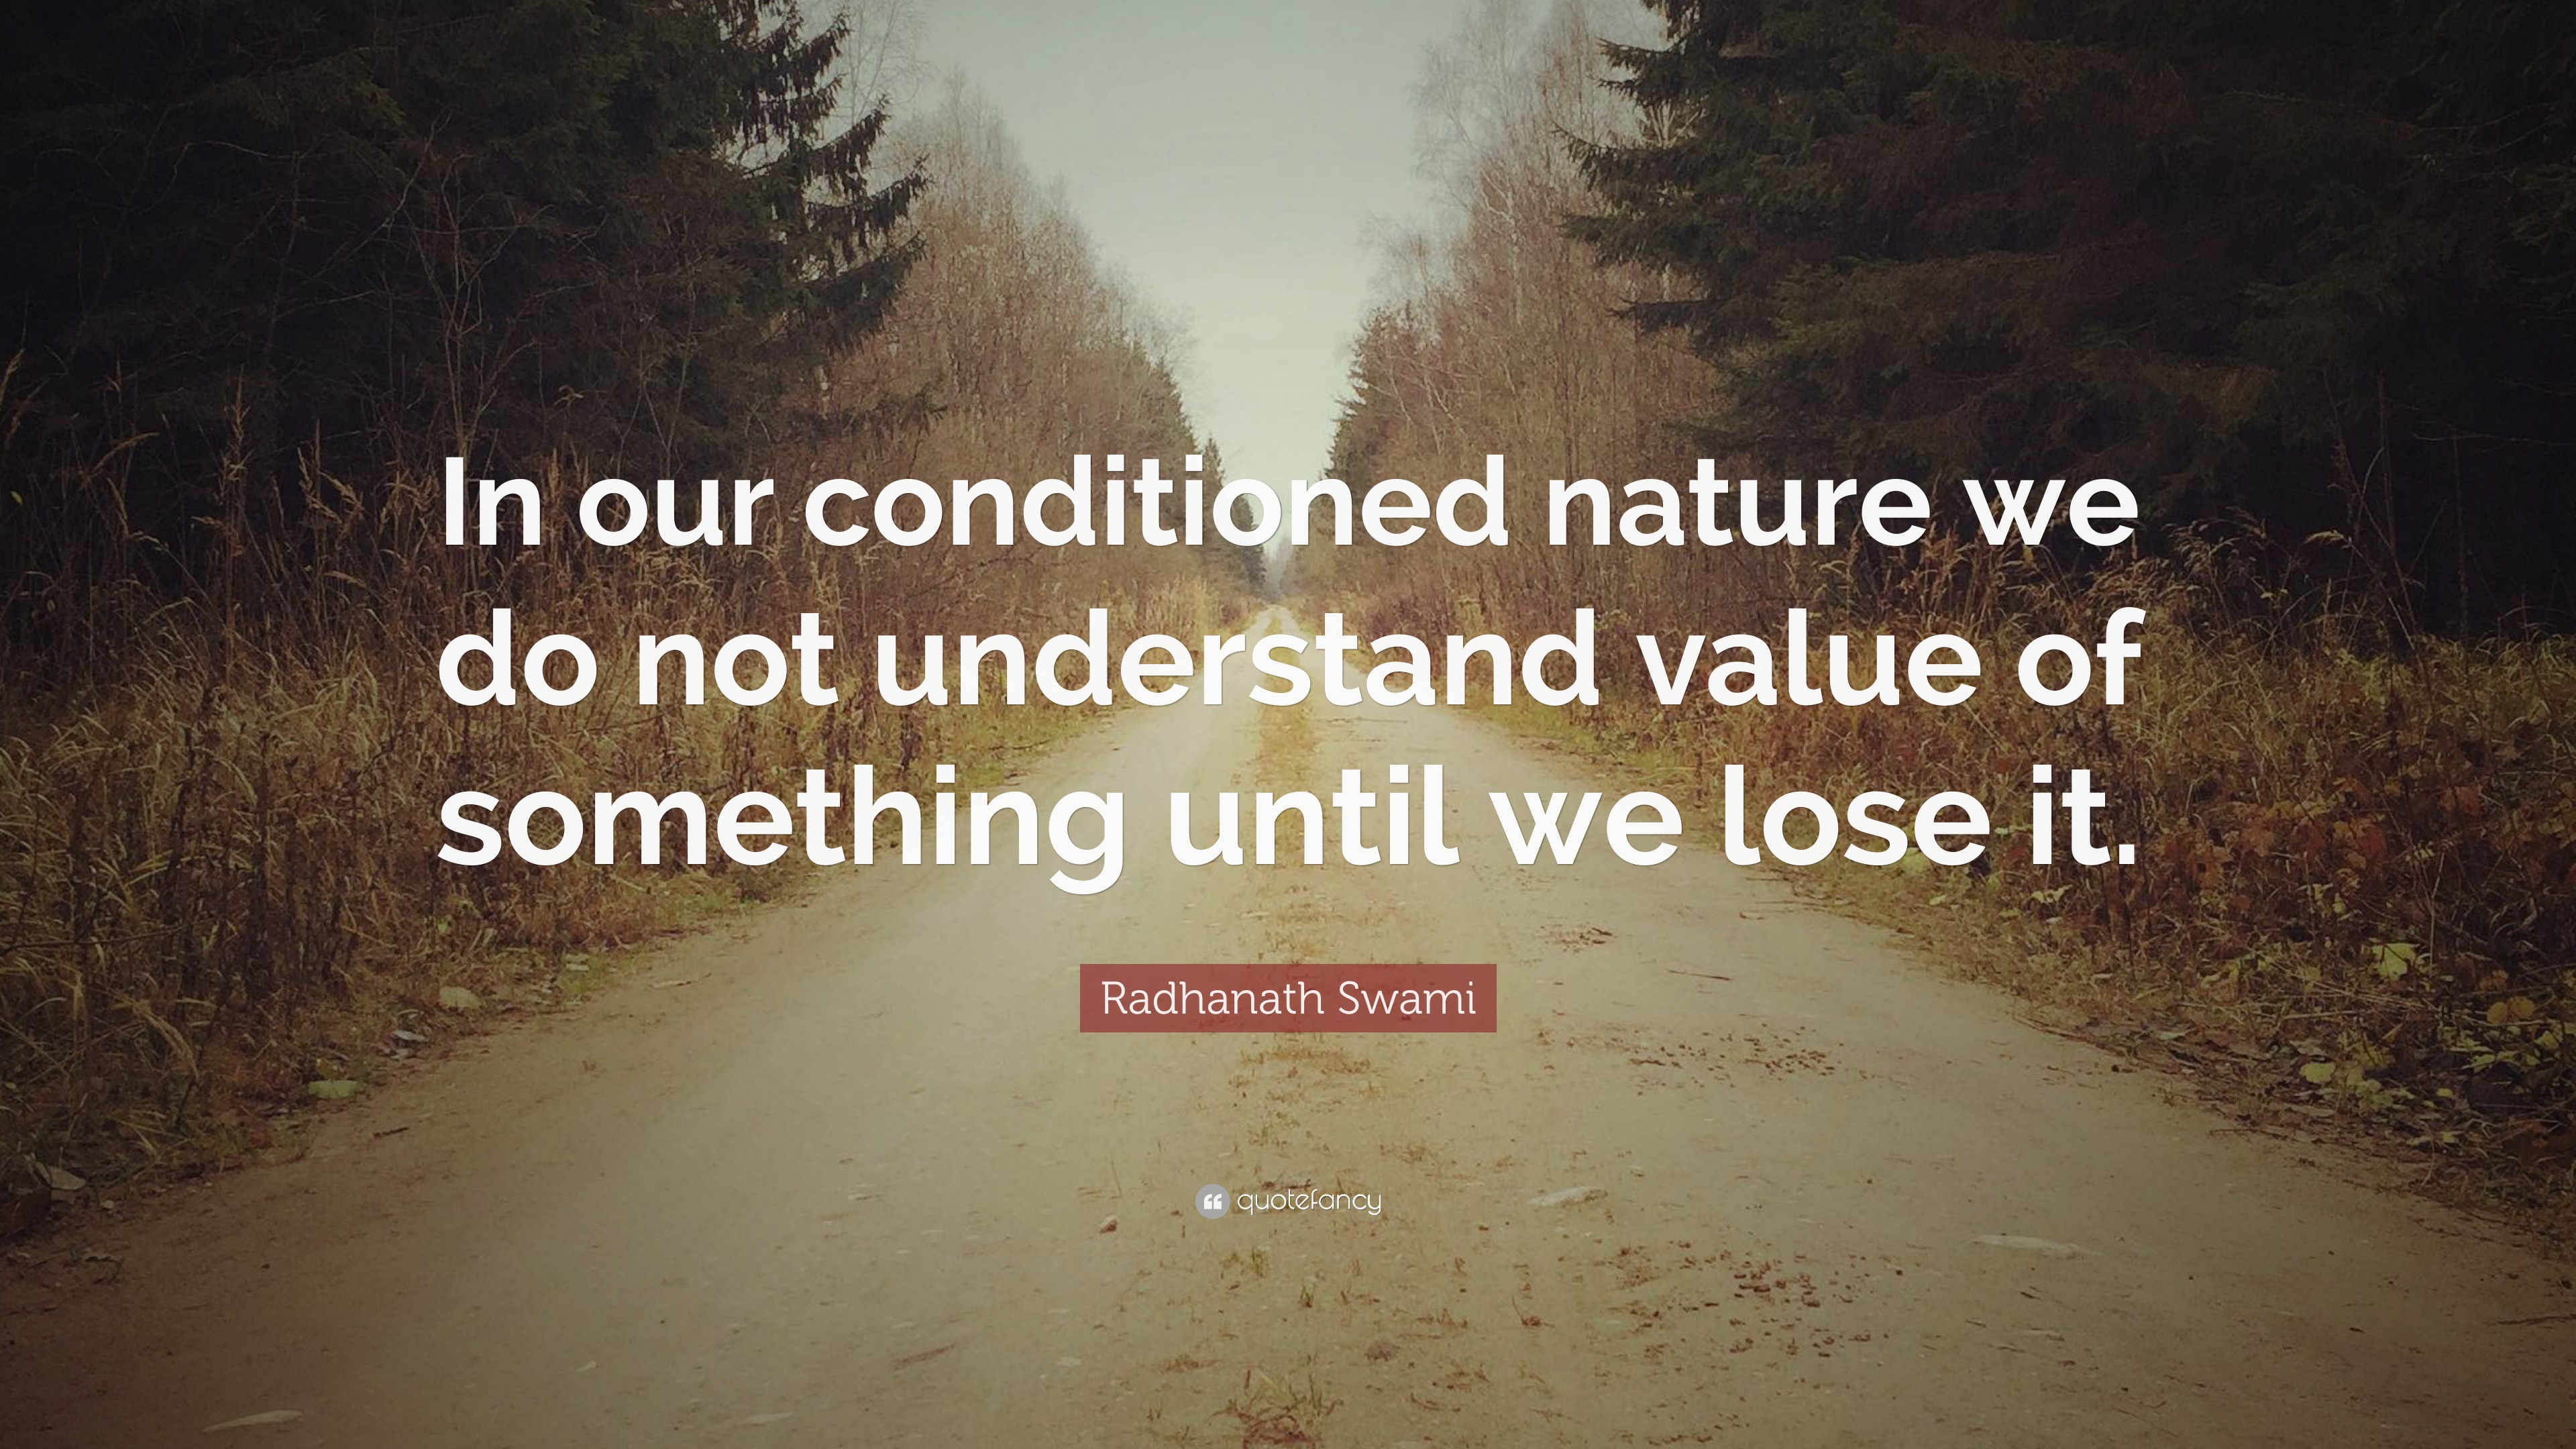 Radhanath Swami Quote: “In our conditioned nature we do not understand